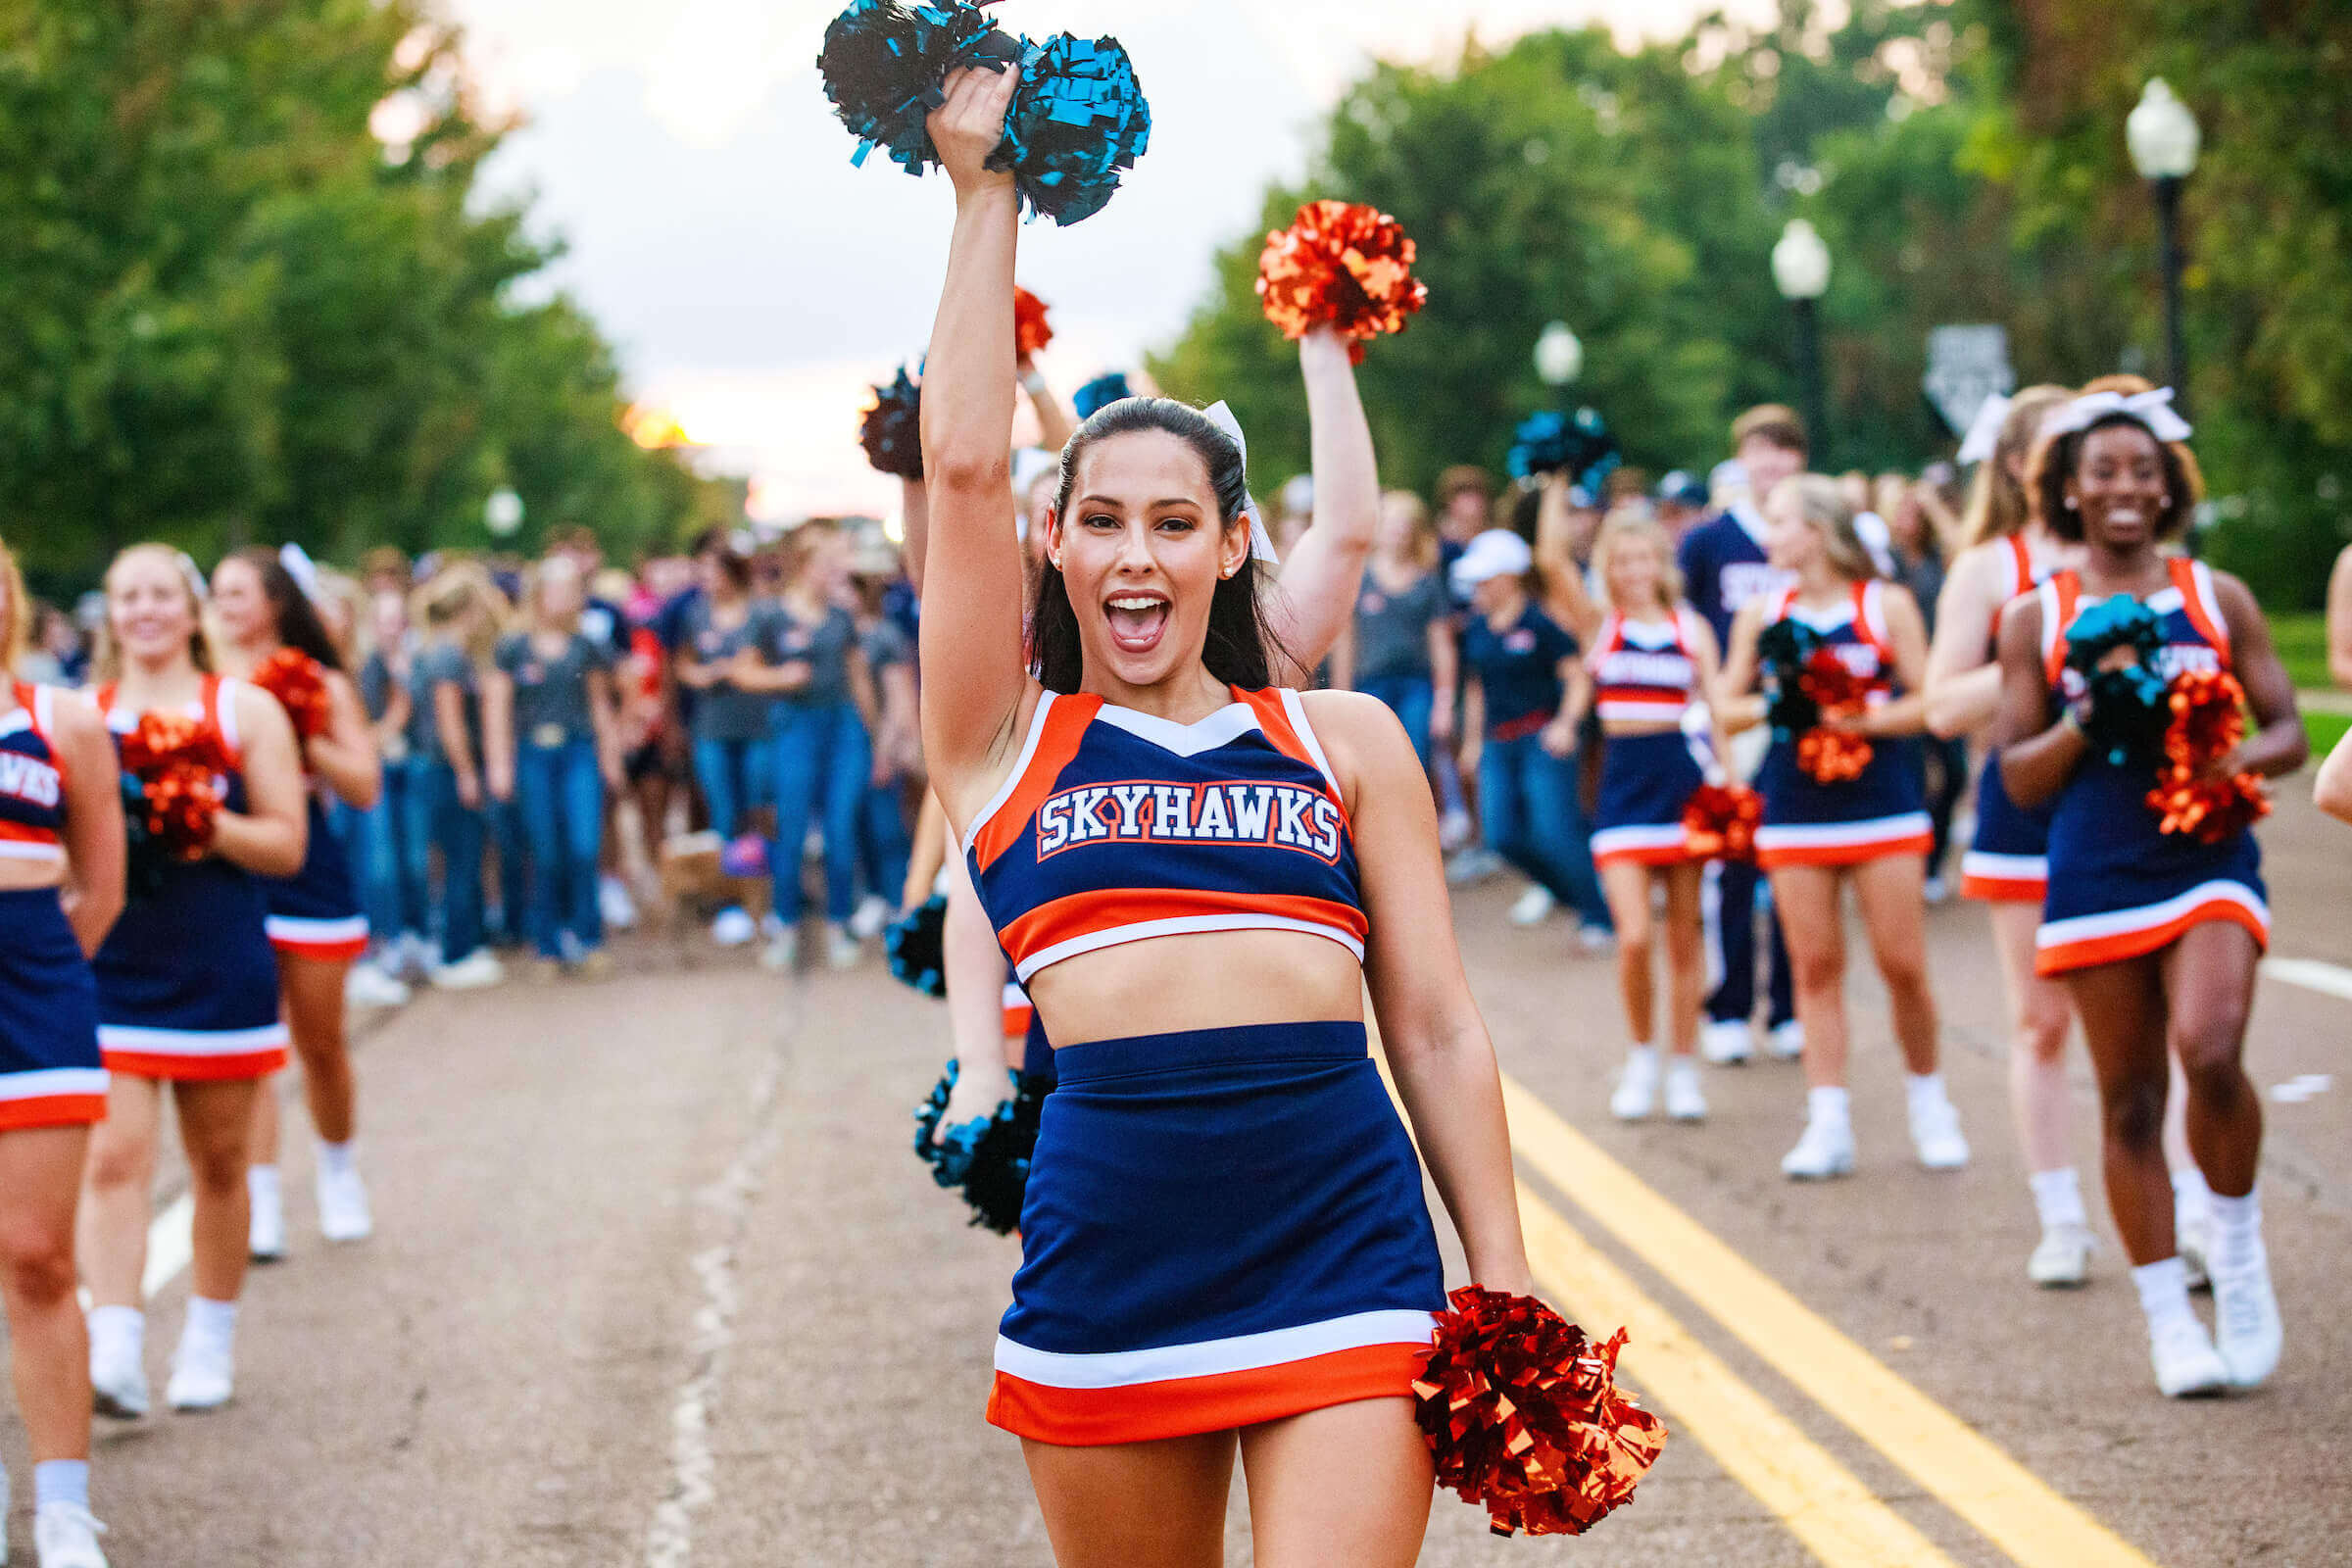 Skyhawk cheerleaders lead a convoy of UT Martin students in our annual downtown festival parade.